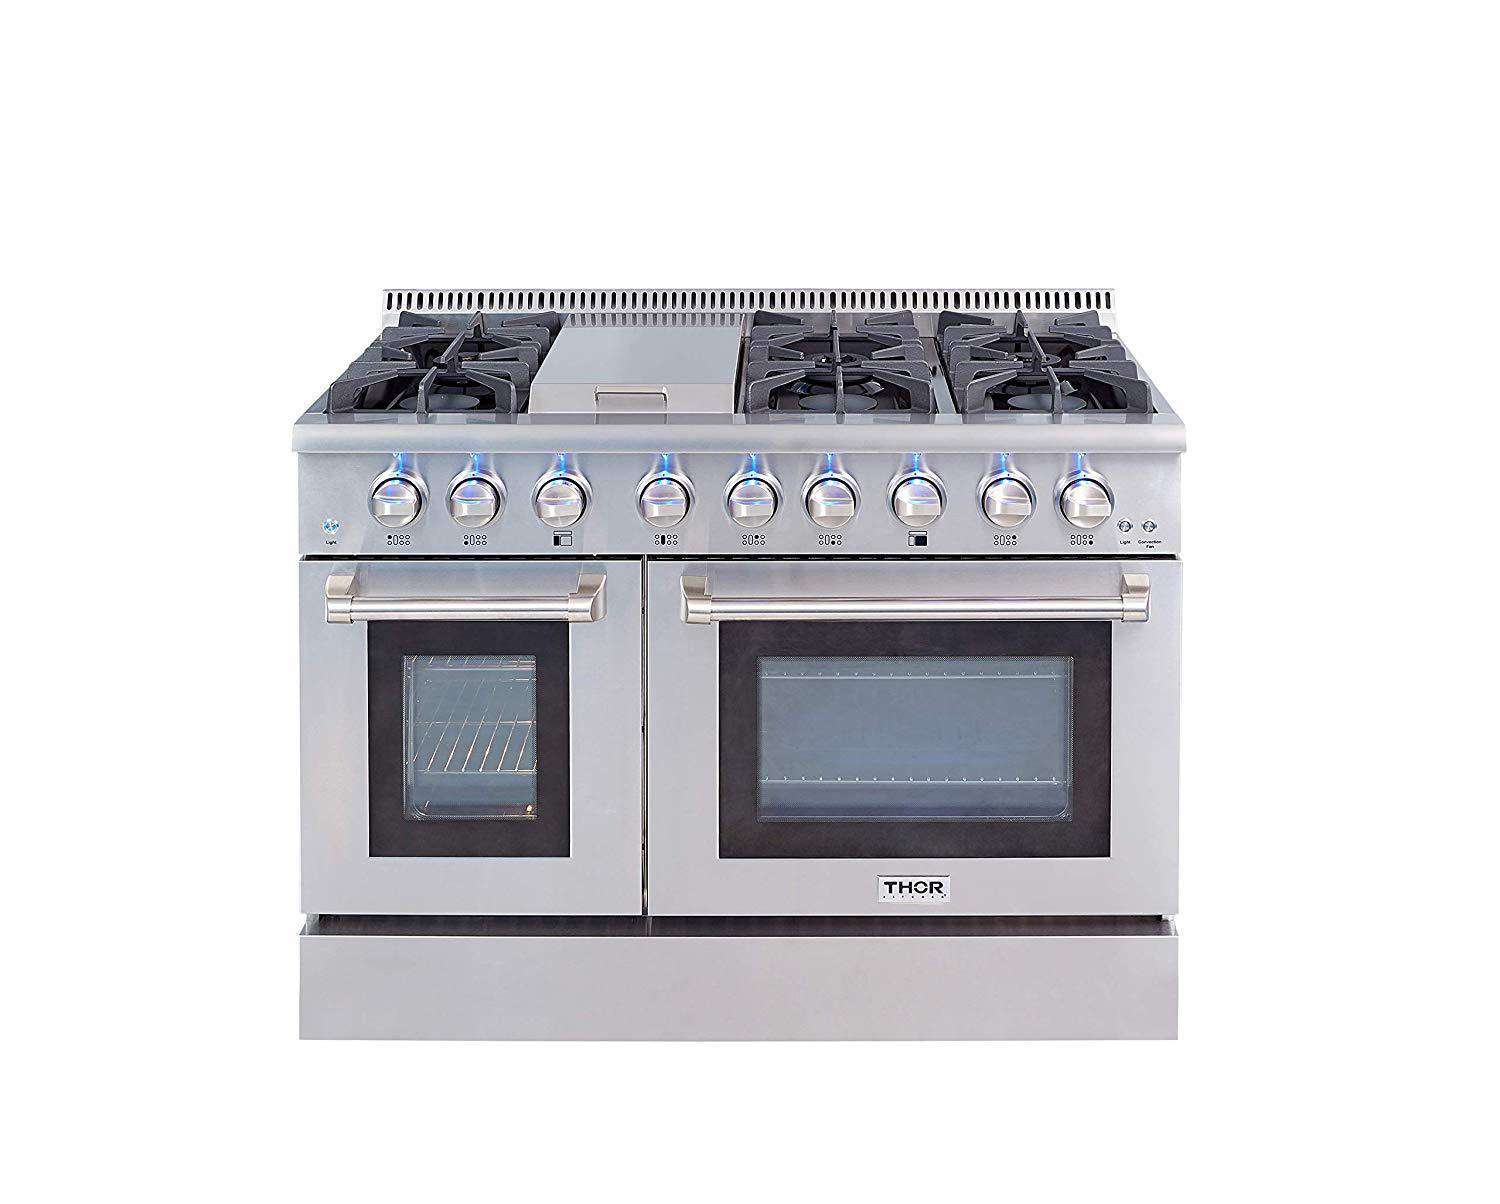 Thor Kitchen, Thor Kitchen HRG4808U 48 in. Professional Gas Range with Double Oven 6 Burners Blue Porcelain Interior Stainless Steel New